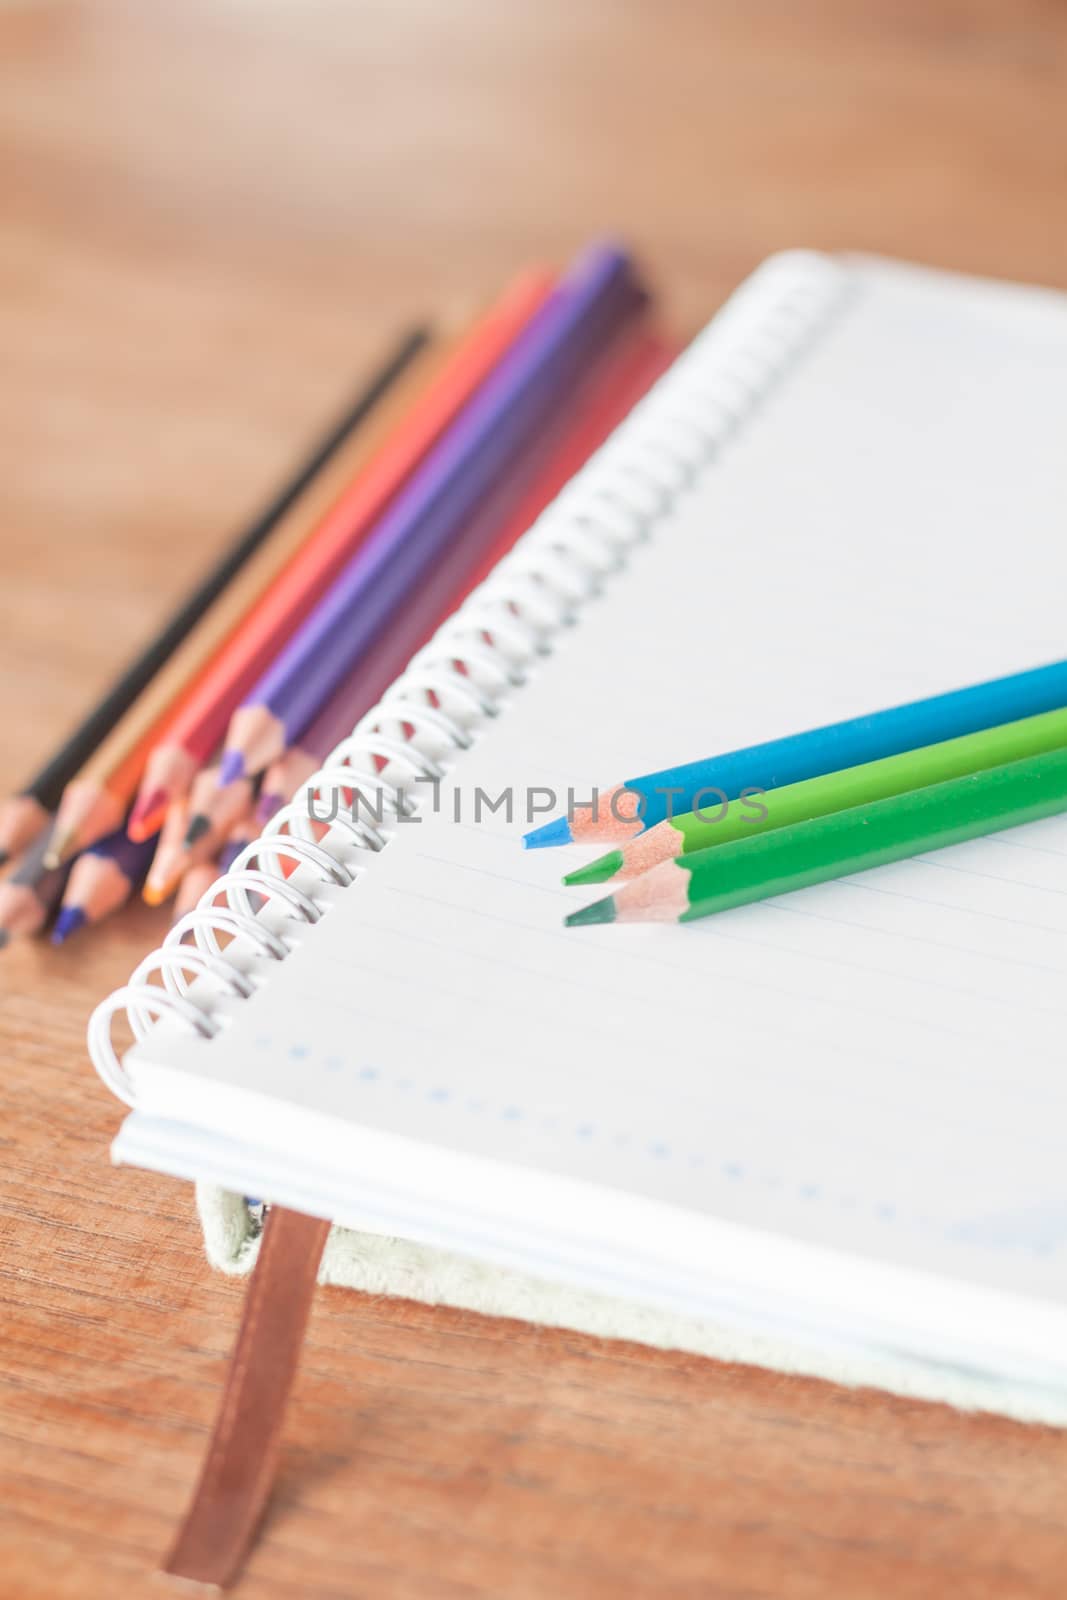 Colorful pencils on spiral notebook and green notebook, stock photo